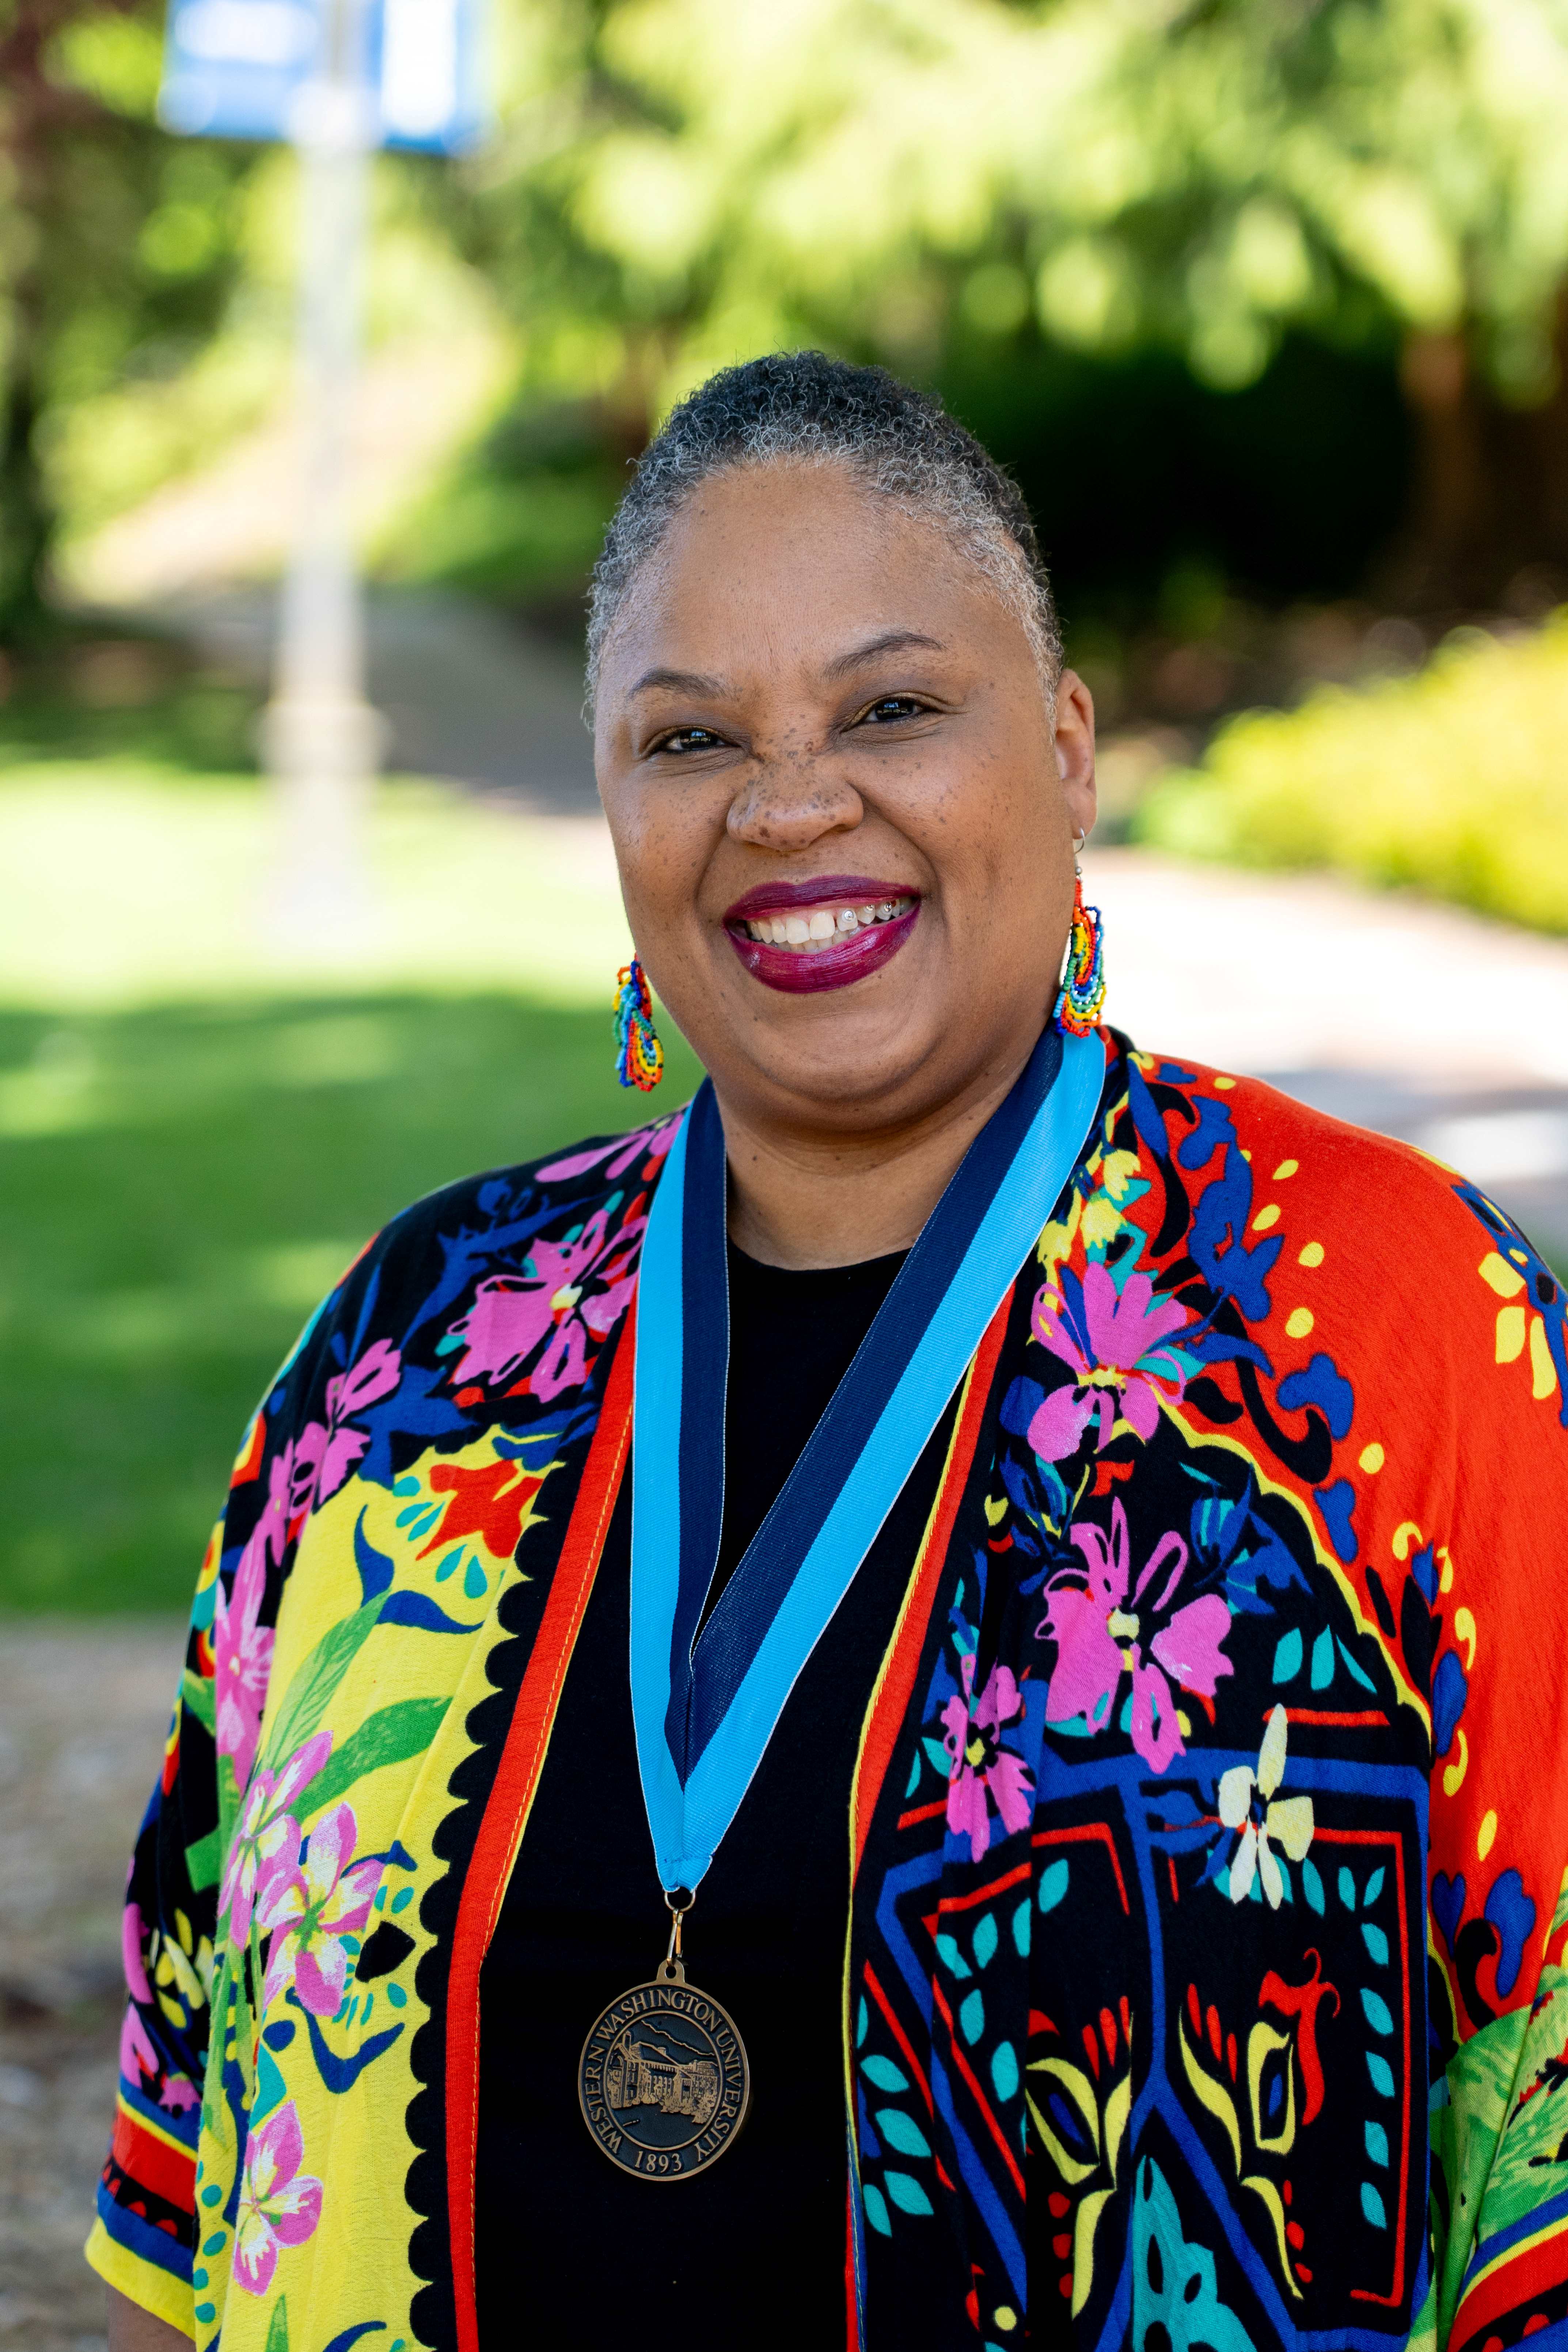 Dr. Tara Perry wearing a vibrant, colorful blouse and a WWU award medallion 